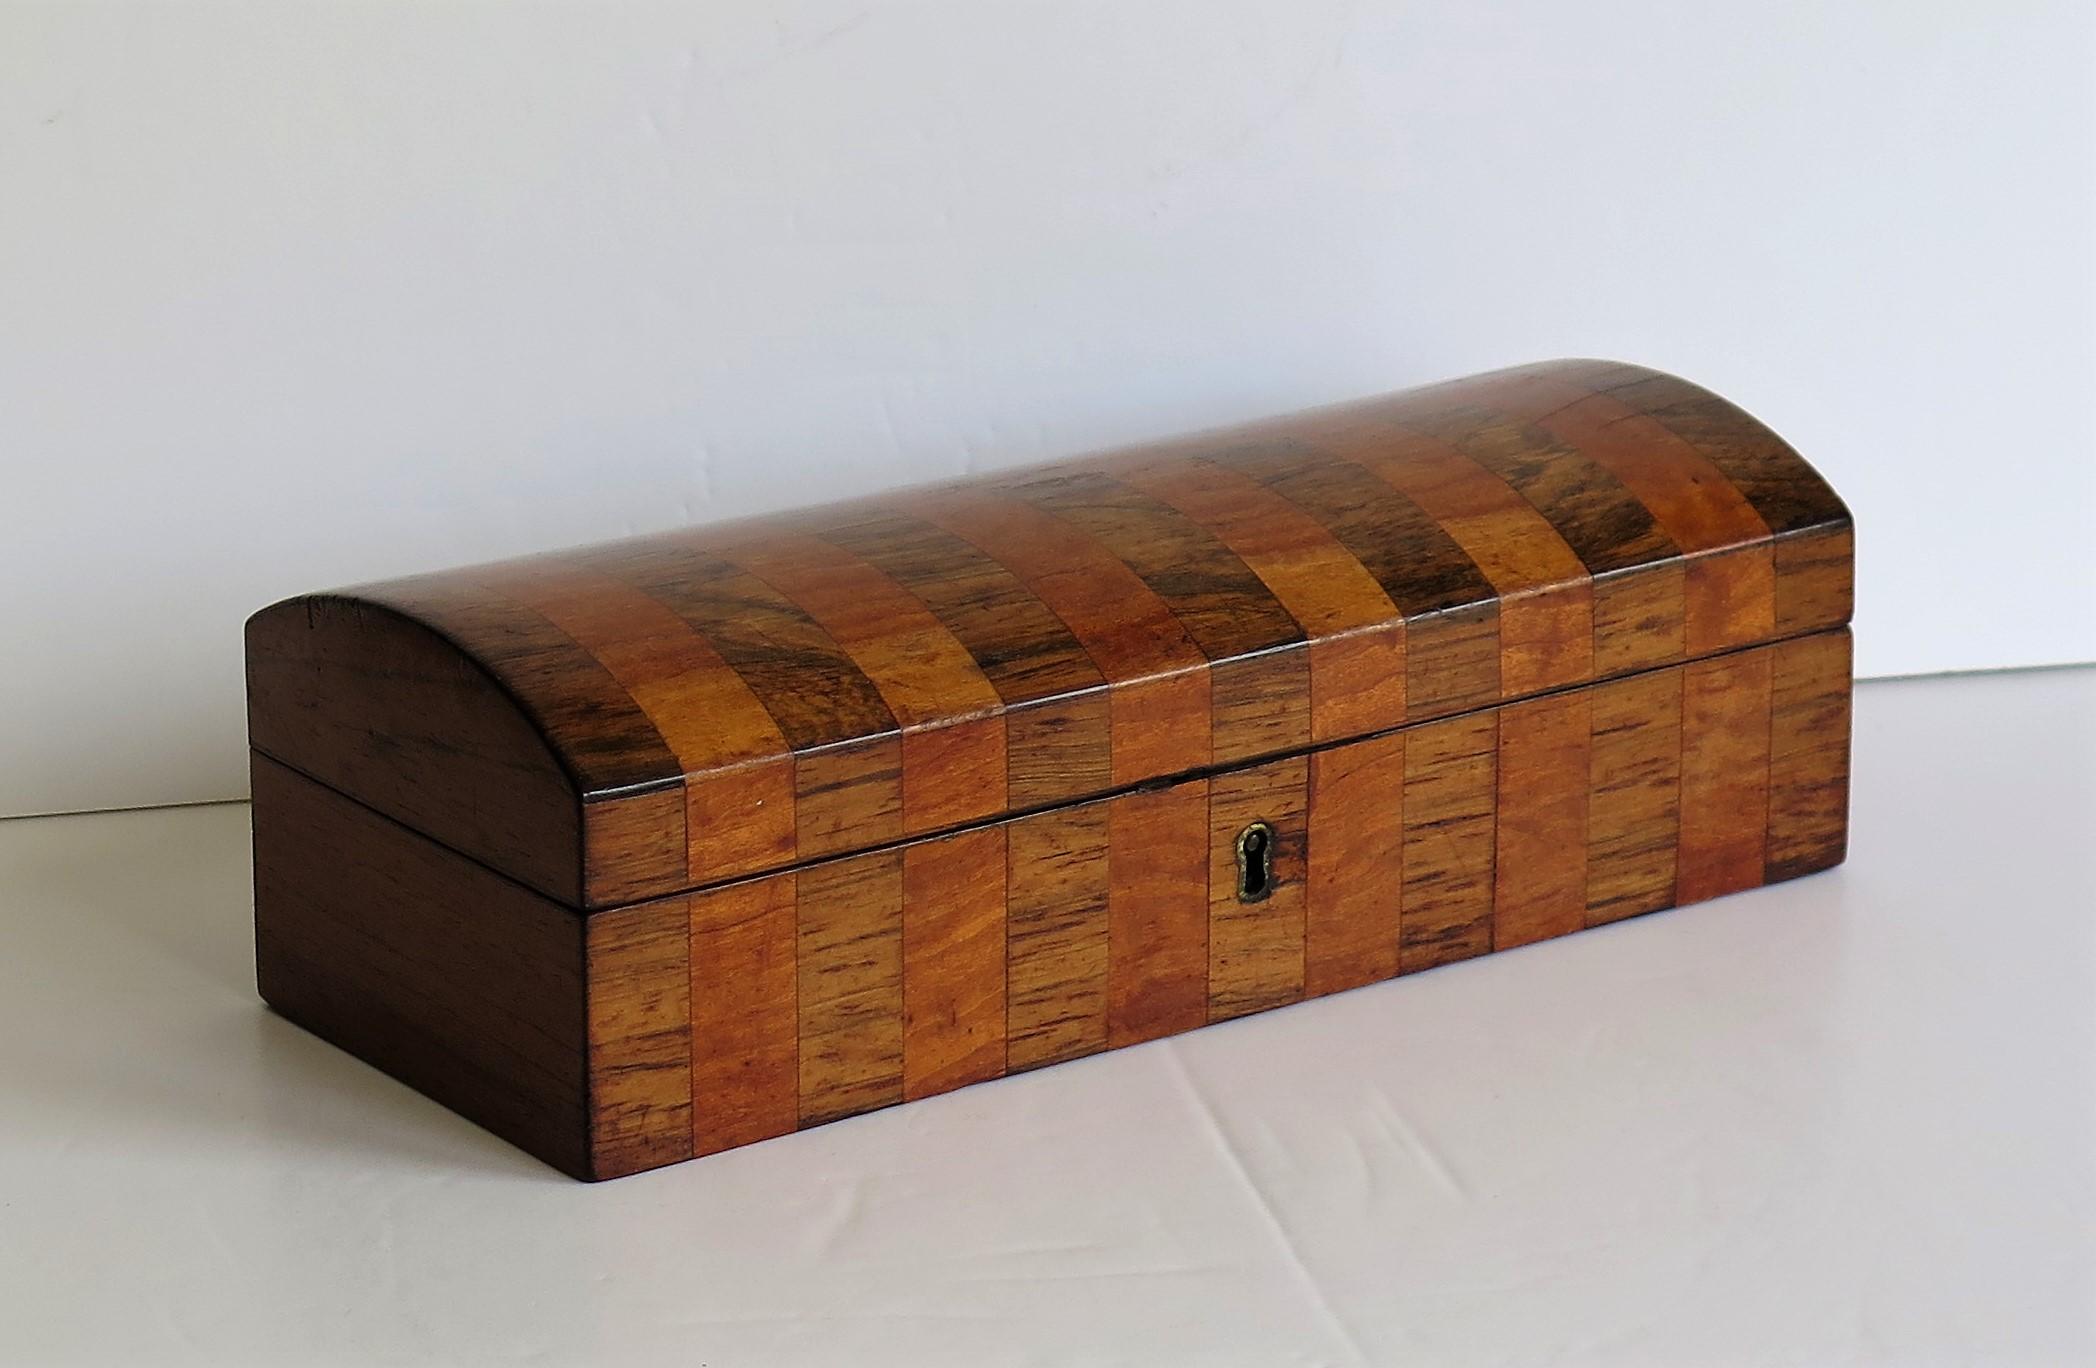 This is a beautiful, fine quality English Georgian period lidded box, inlaid with contrasting crossbanded hardwoods with a hinged domed lid, dating to circa 1810.

The box has a rectangular shape and is handmade of different contrasting hardwoods,